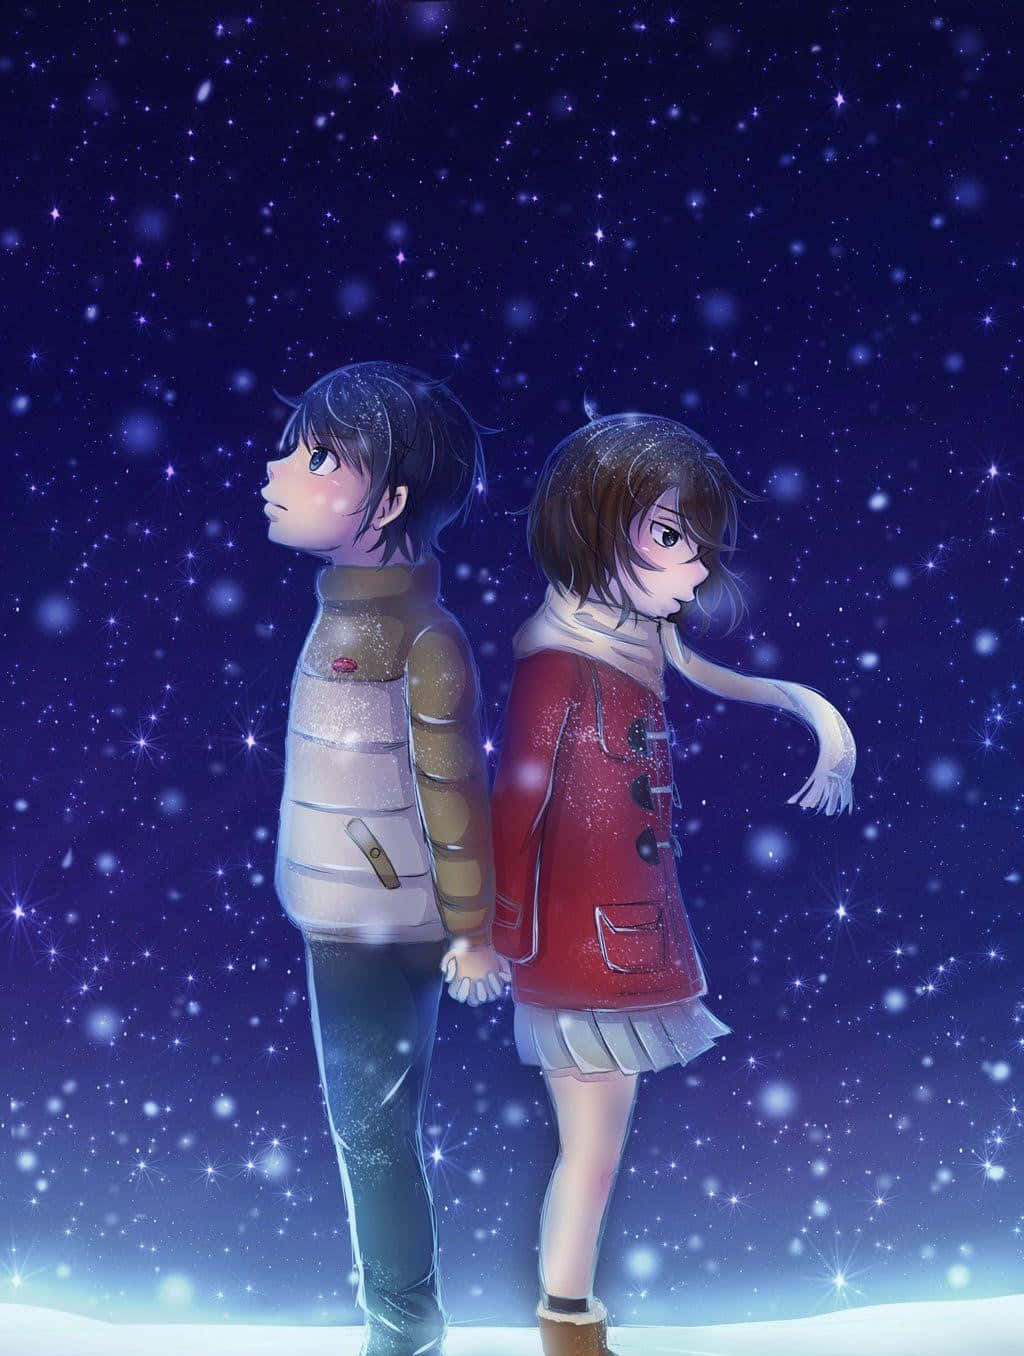 A Couple Standing In The Snow Holding Hands